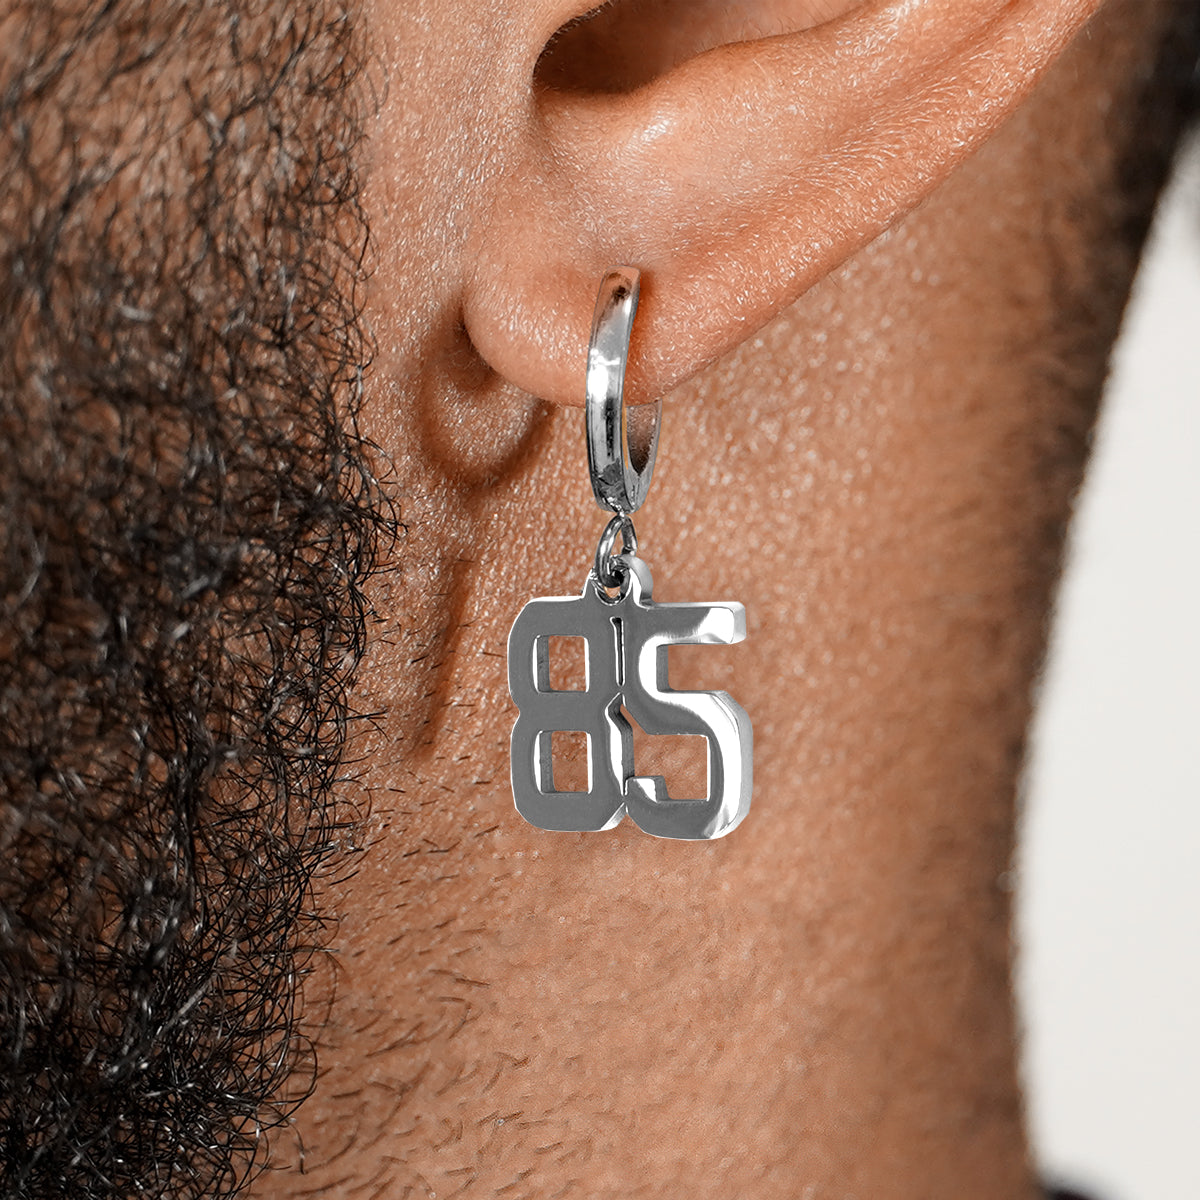 85 Number Earring - Stainless Steel